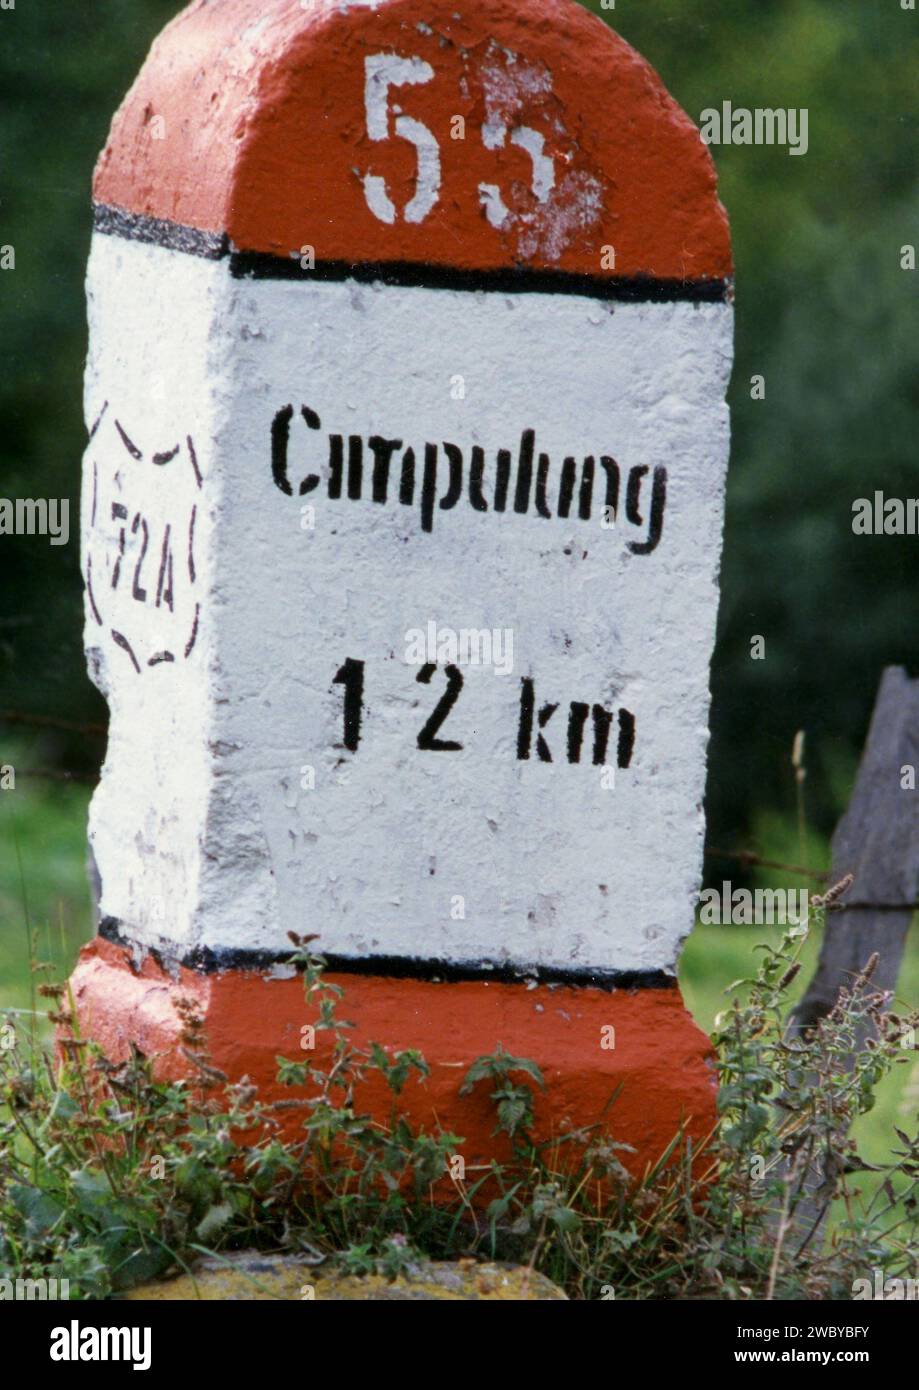 Argeș County, Romania, cca 1992. Landscape in the countryside. Distance marker on the side of a road. Stock Photo